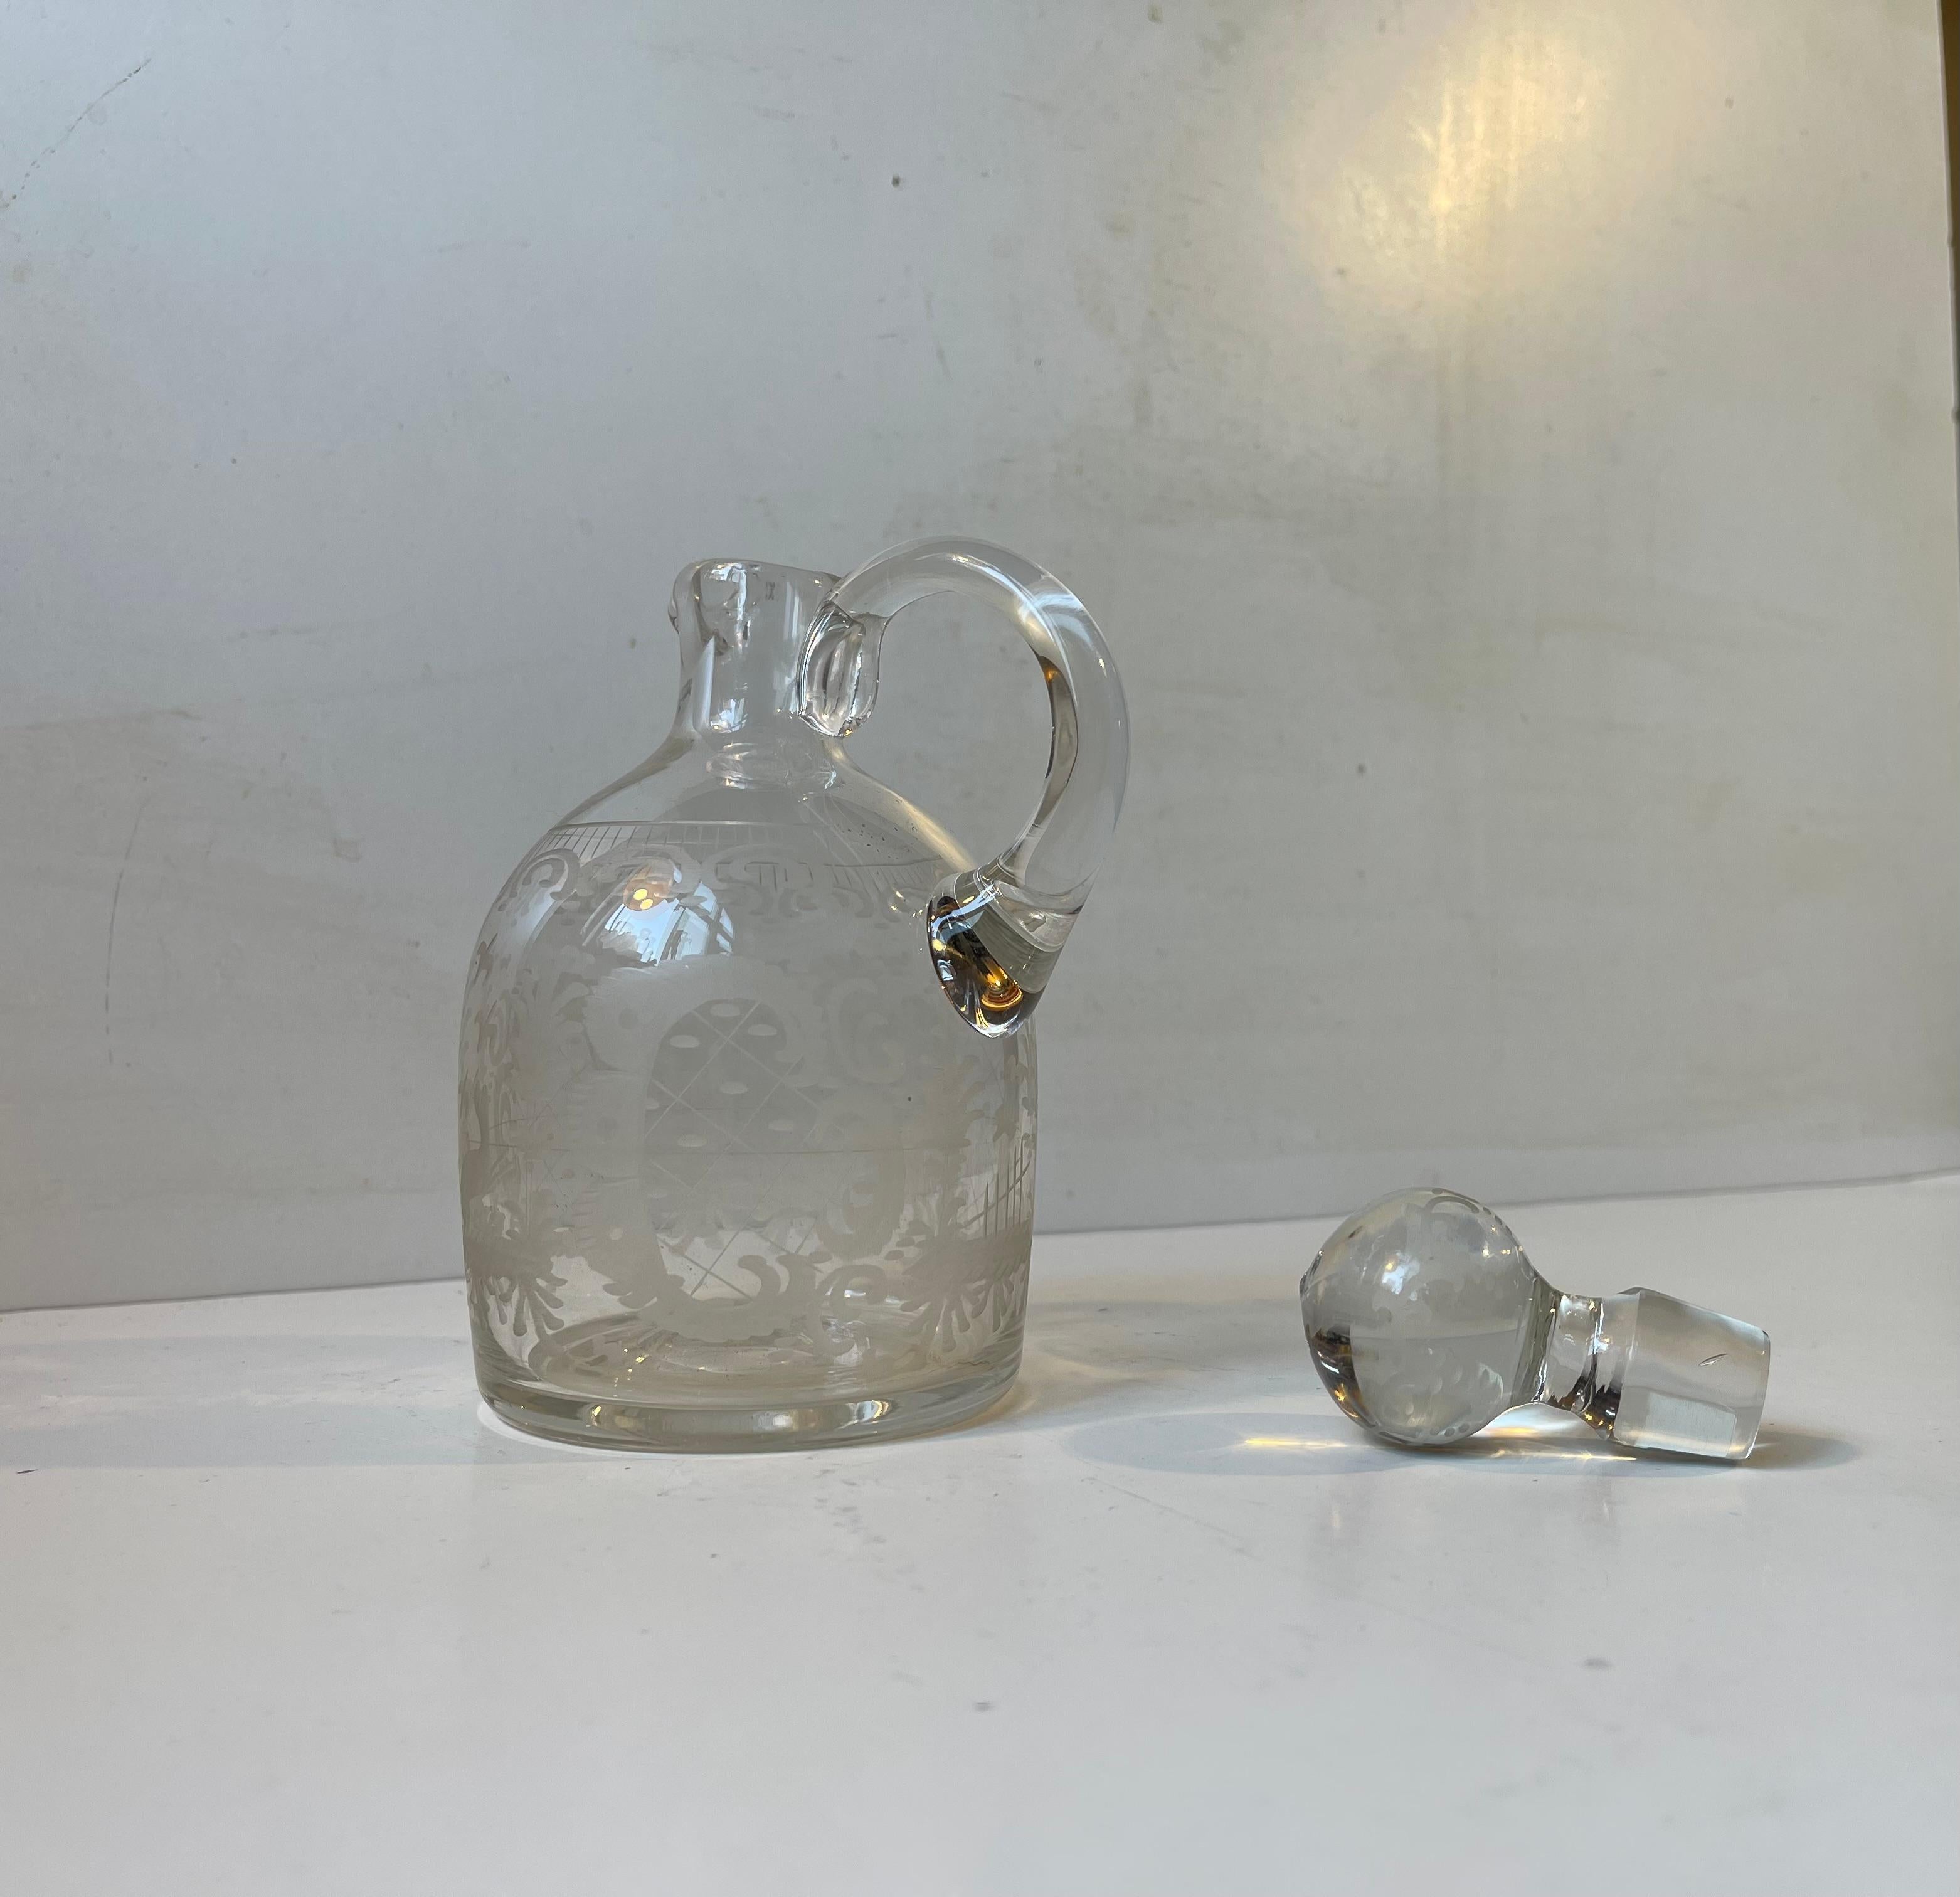 Small Hand-blown Port Wine decanter in clear glass decorated with etchings to its body and stopper. Made at Holmegaard/Kastrup in Denmark circa 1900-1920. Measurements: H: 18 cm, Diameter: 10 cm, Capacity: 0,5 liter.

Free World wide shipping.